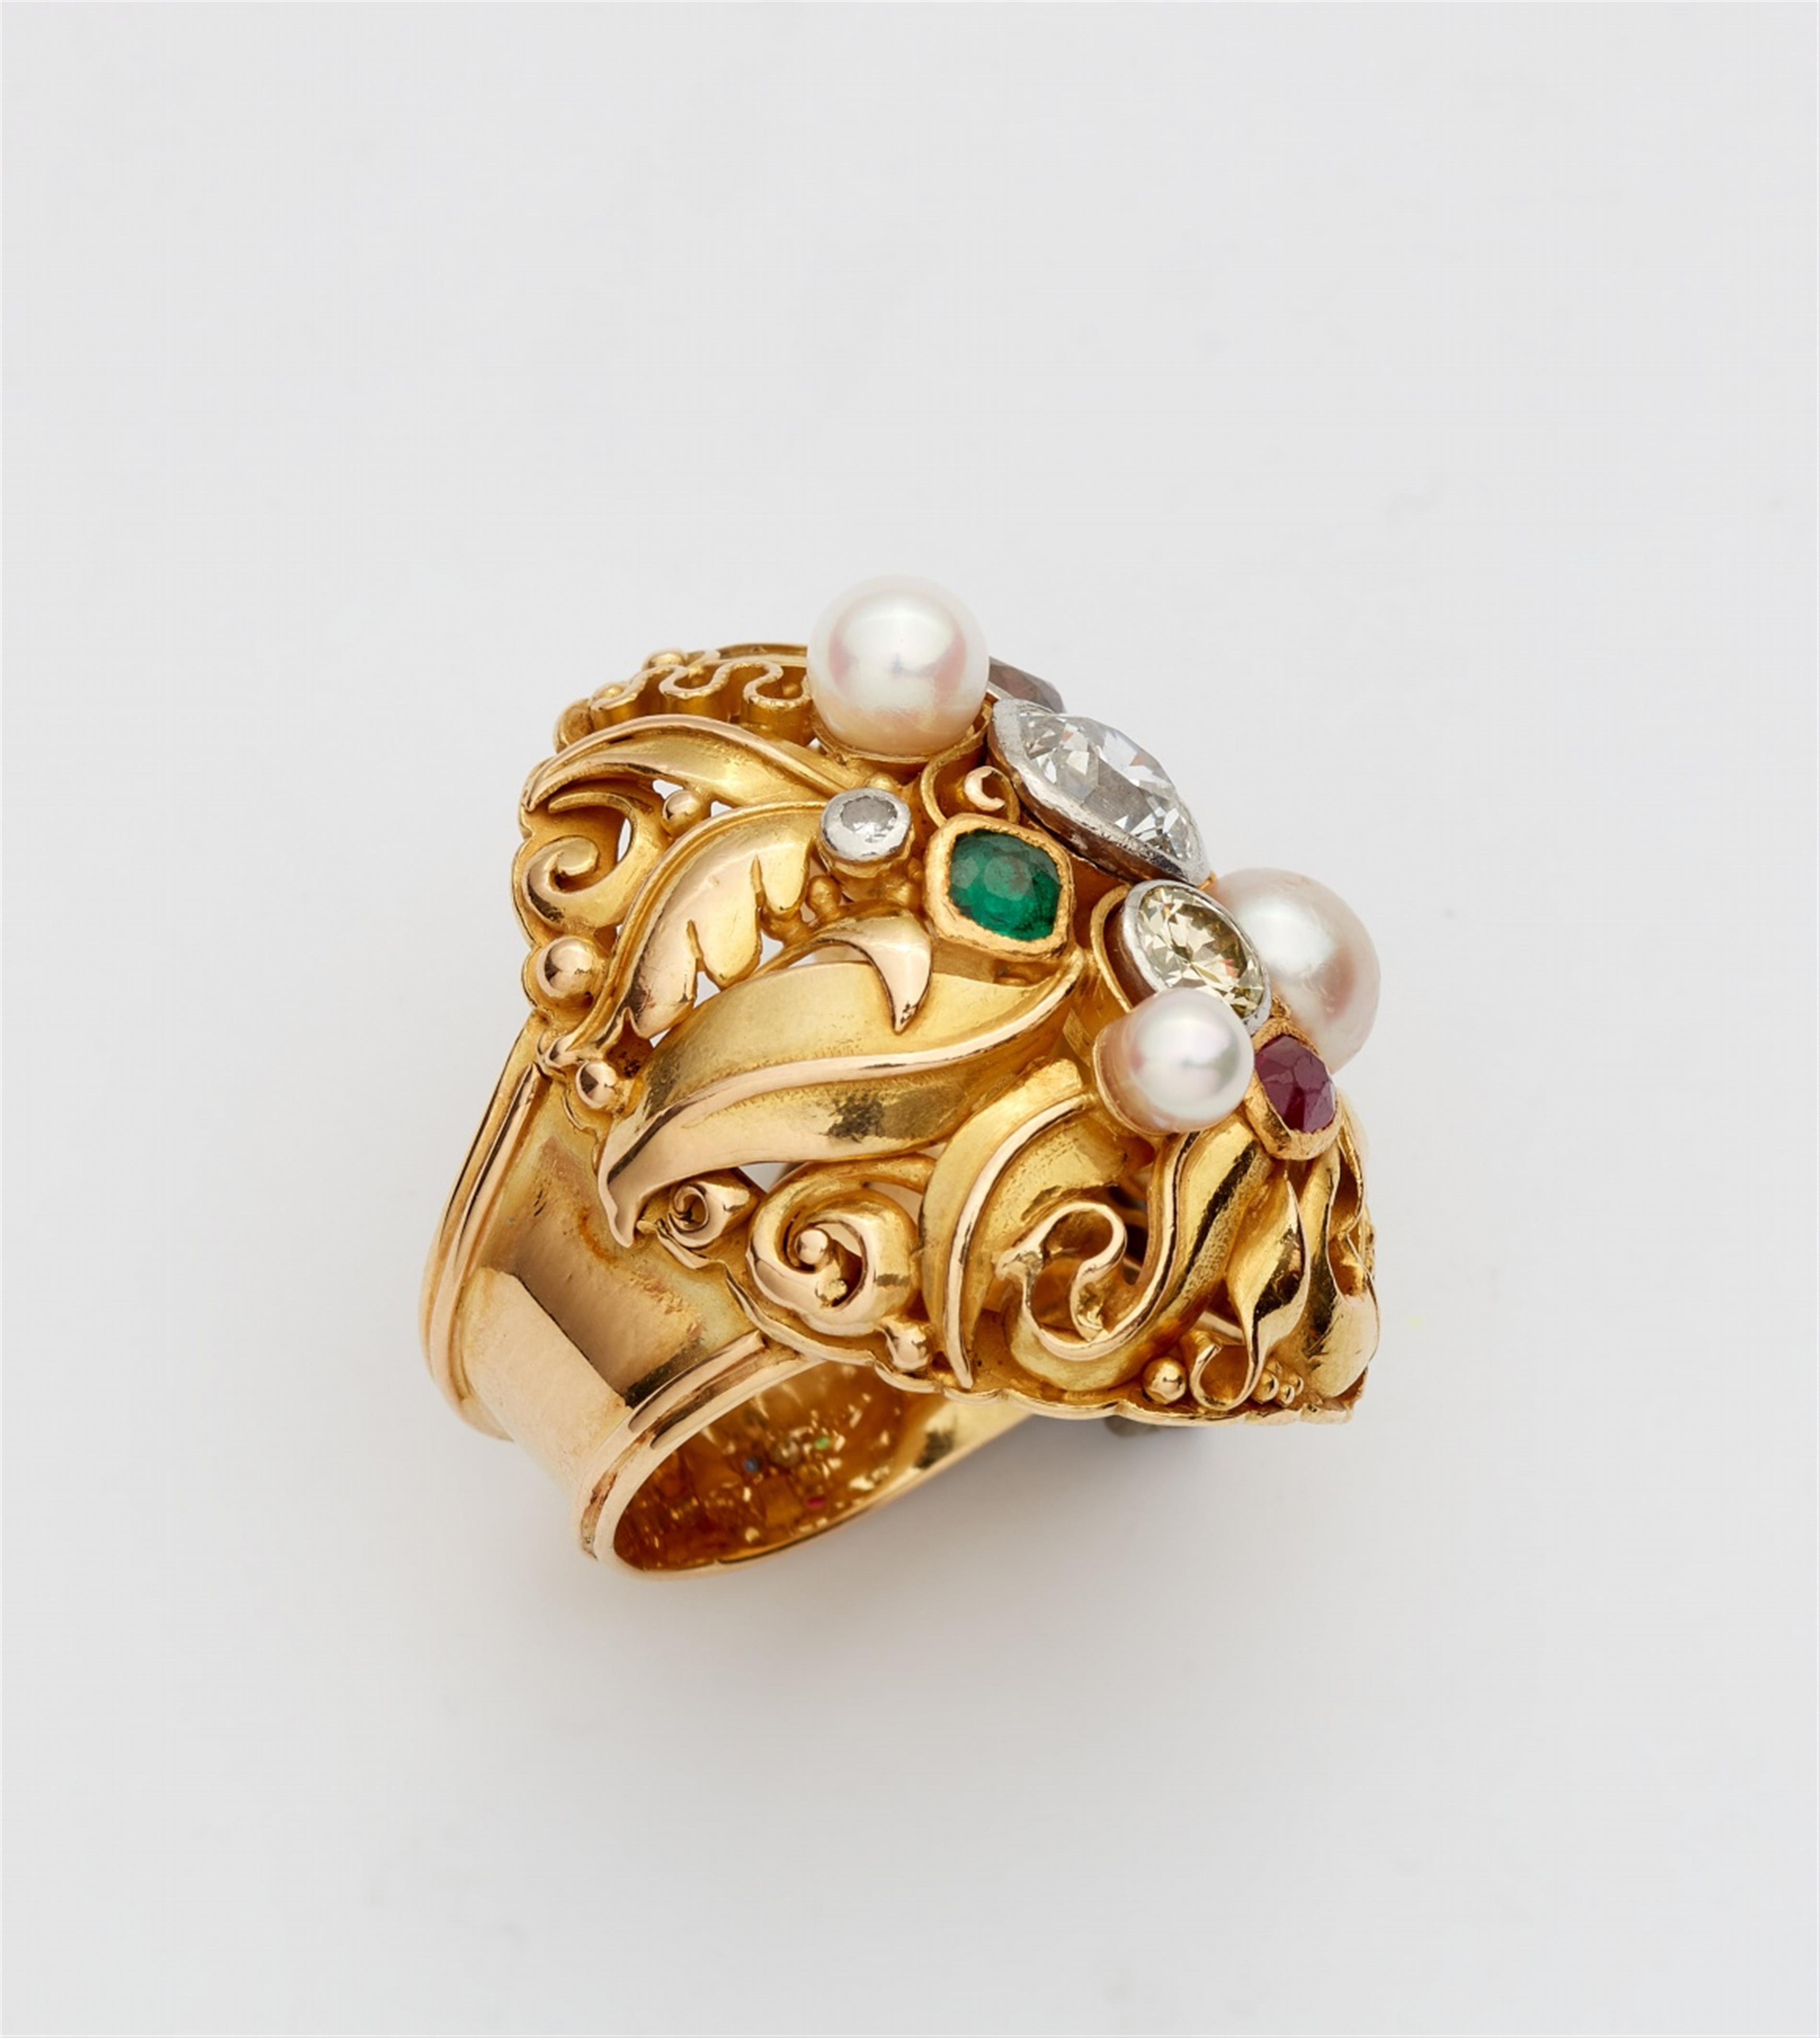 An 18k gold and gemstone ring - image-5